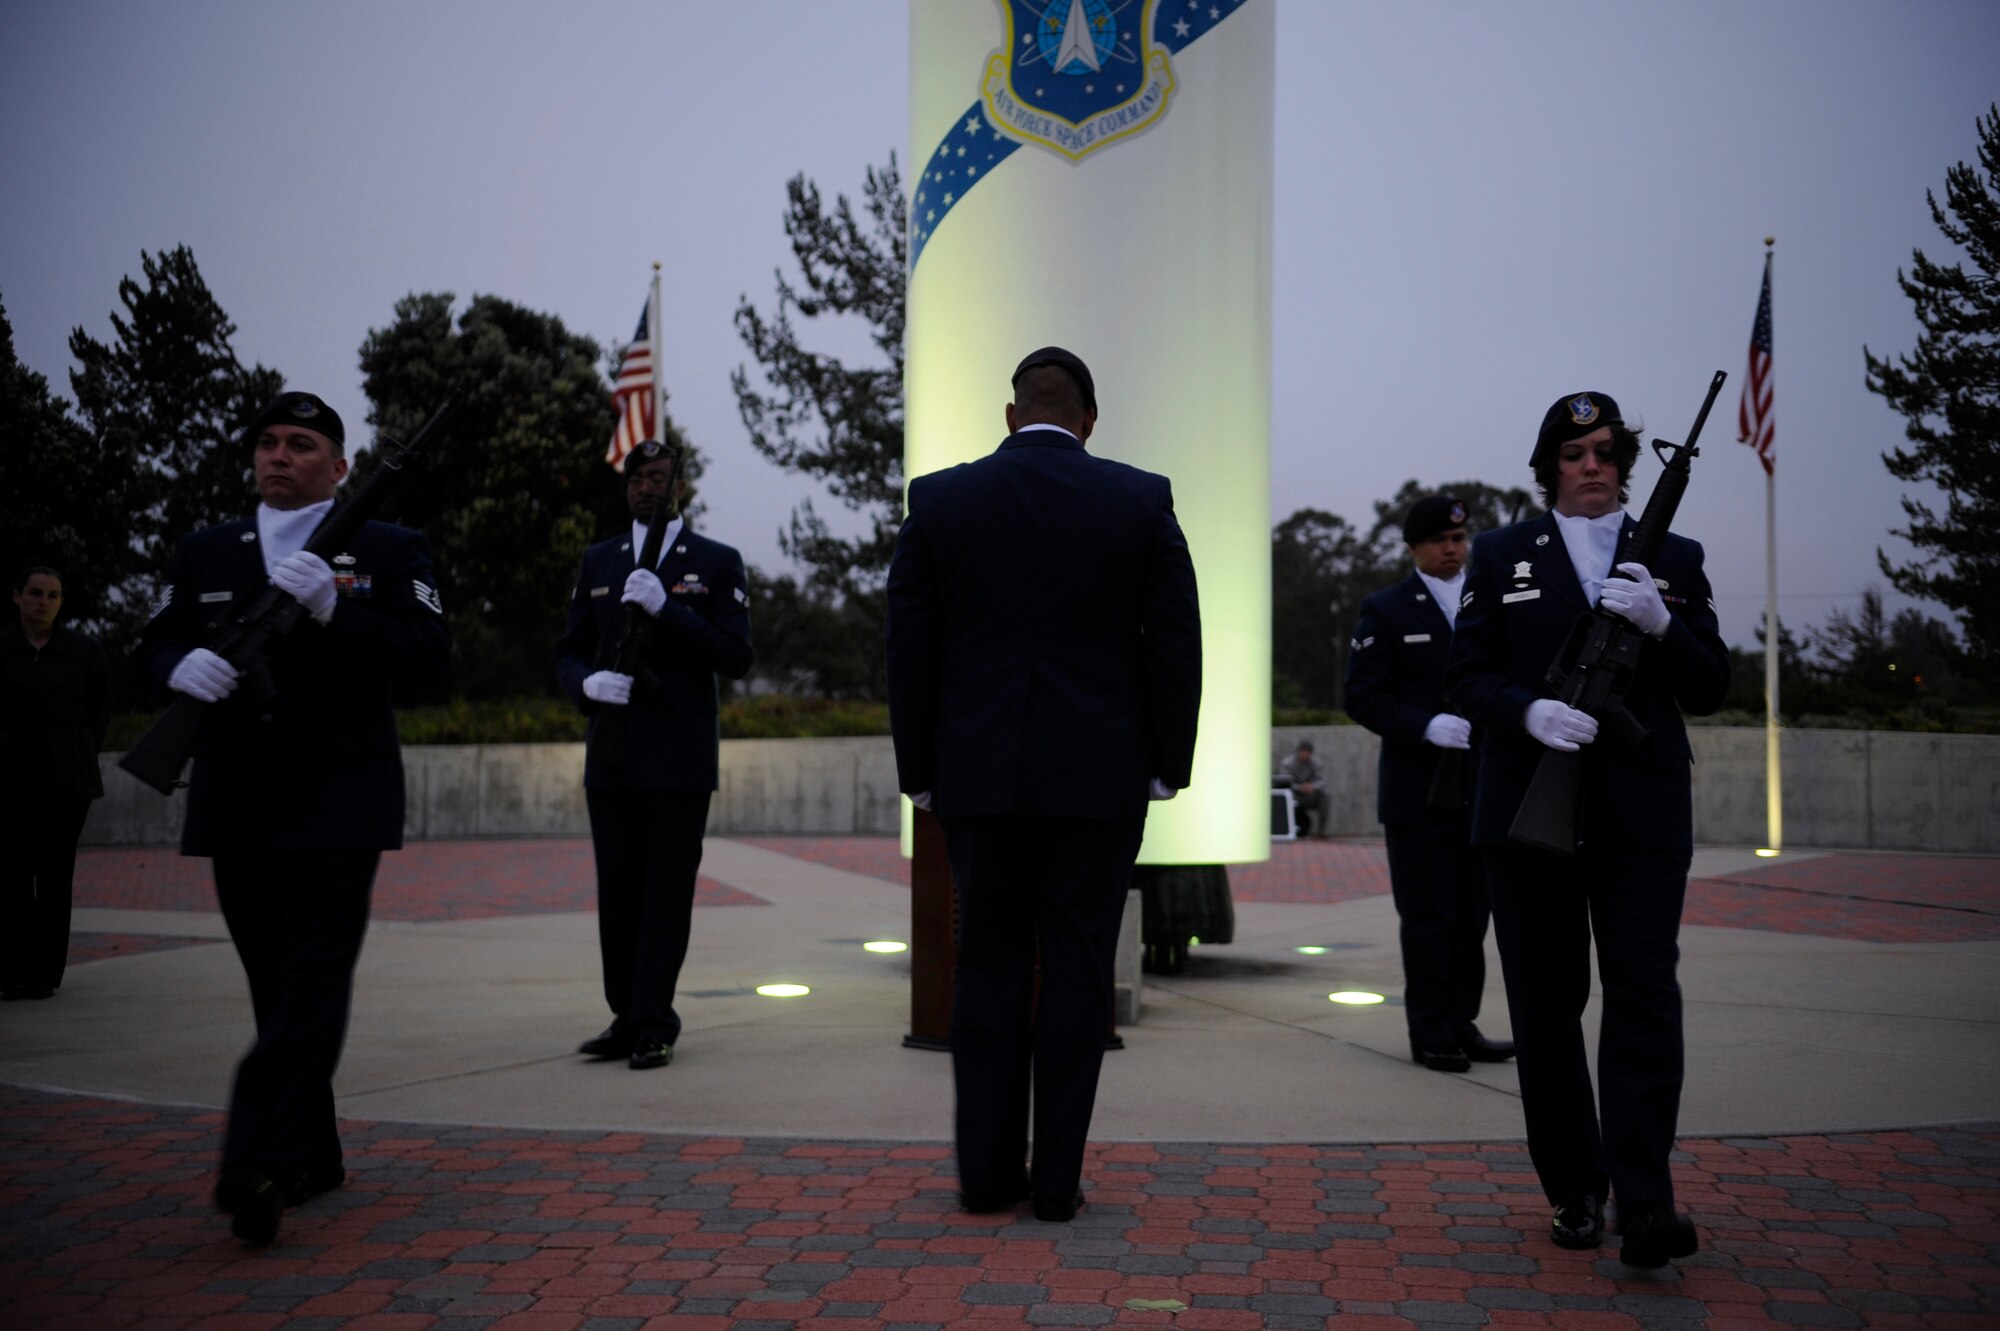 VANDENBERG AIR FORCE BASE, Calif. -- Members of the 30th Security Forces Squadron perform a changing of the guard during the Candlelight Vigil Ceremony at Missile V here Thursday, May 19, 2011.  The ceremony was held in honor of fallen policemen during National Police Week. (U.S. Air Force photo/Staff Sgt. Andrew Satran) 

 